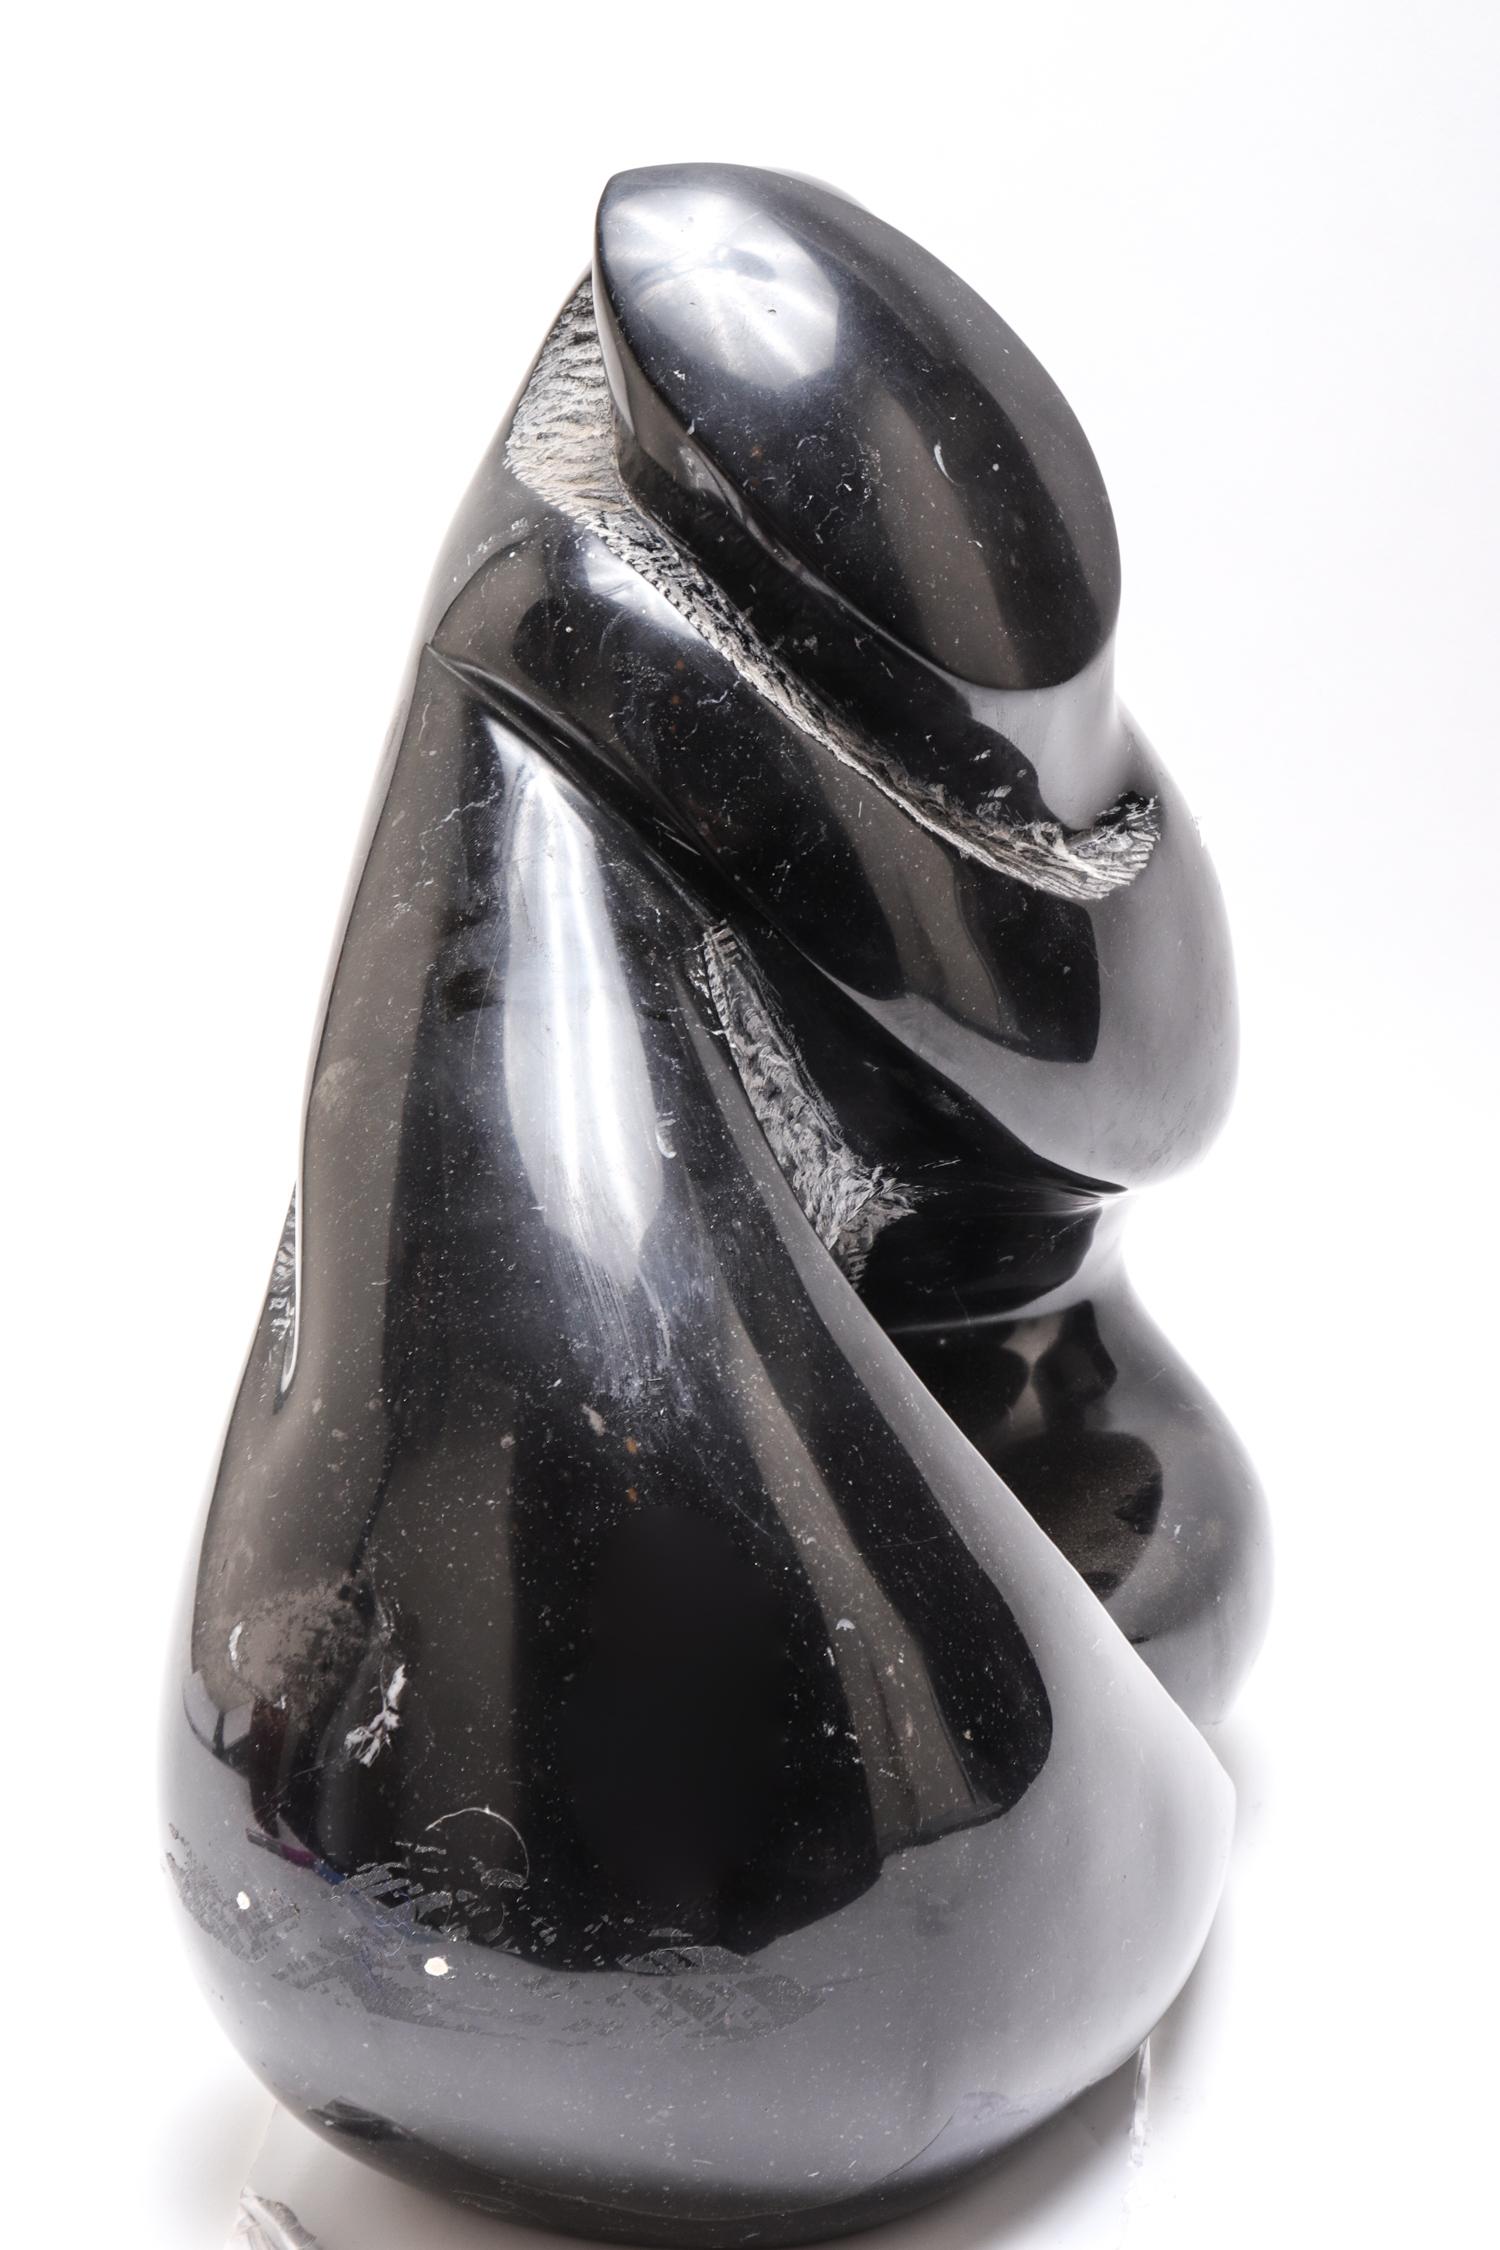 Mid-Century Modern soapstone sculpture depicting a stylized couple in embrace. The piece is in great vintage condition with age-appropriate wear and use. Measures: 17